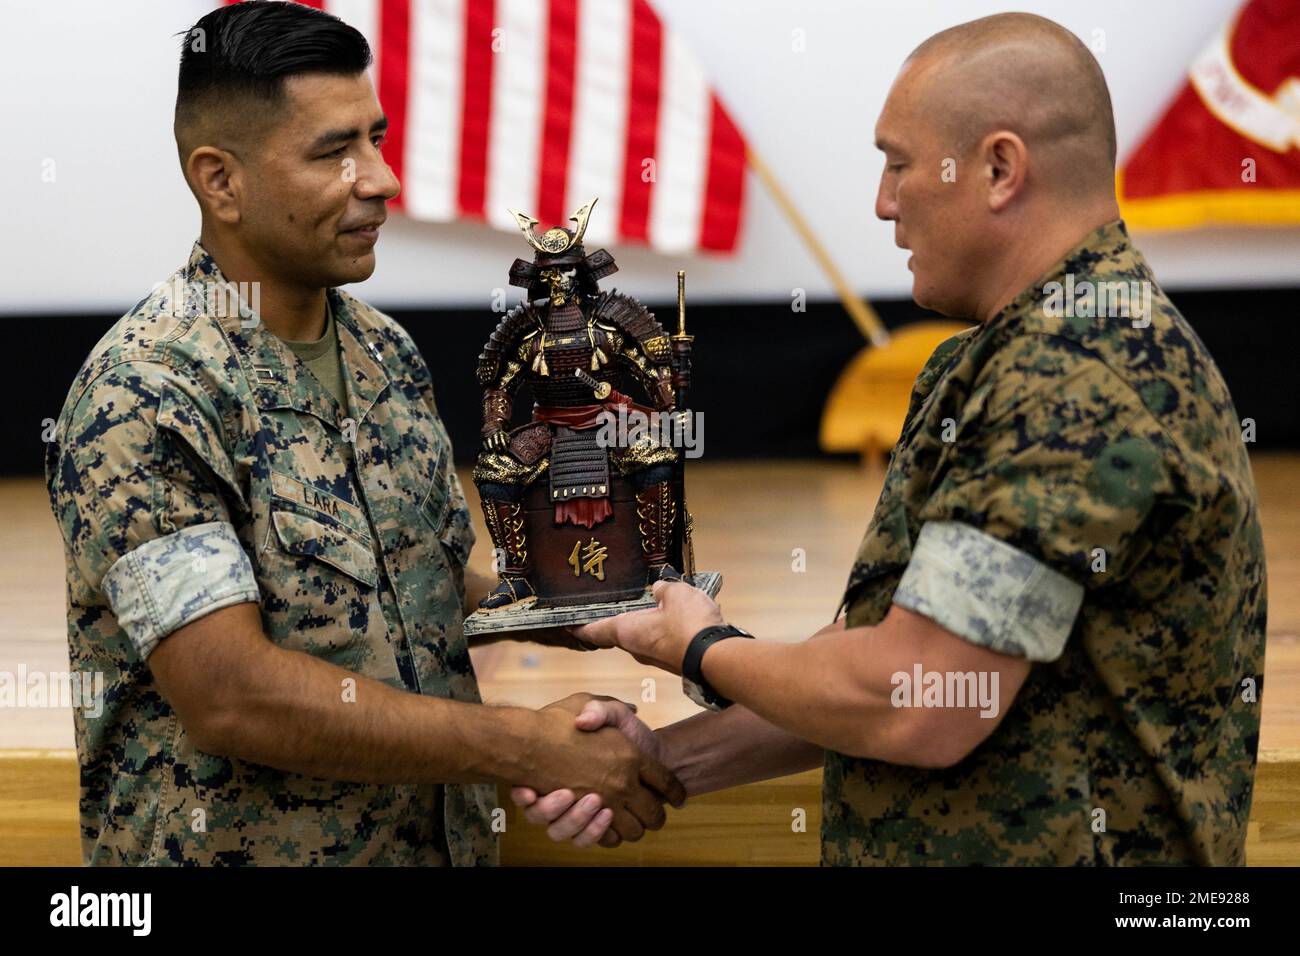 U.S. Marine Corps Lt. Col. Richard Wagner, commanding officer of III Marine Expeditionary Force Support Battalion, III Marine Expeditionary Force, passes on a farewell gift to Capt. Cristobal Lara, the former company commander of Headquarters Service Company, III MSB, III MEF, after a change of command ceremony on Camp Courtney, Okinawa, Japan, Aug. 15, 2022. During the ceremony, Lara relinquished command of HQSVC to Maj. Lance Donald. Stock Photo